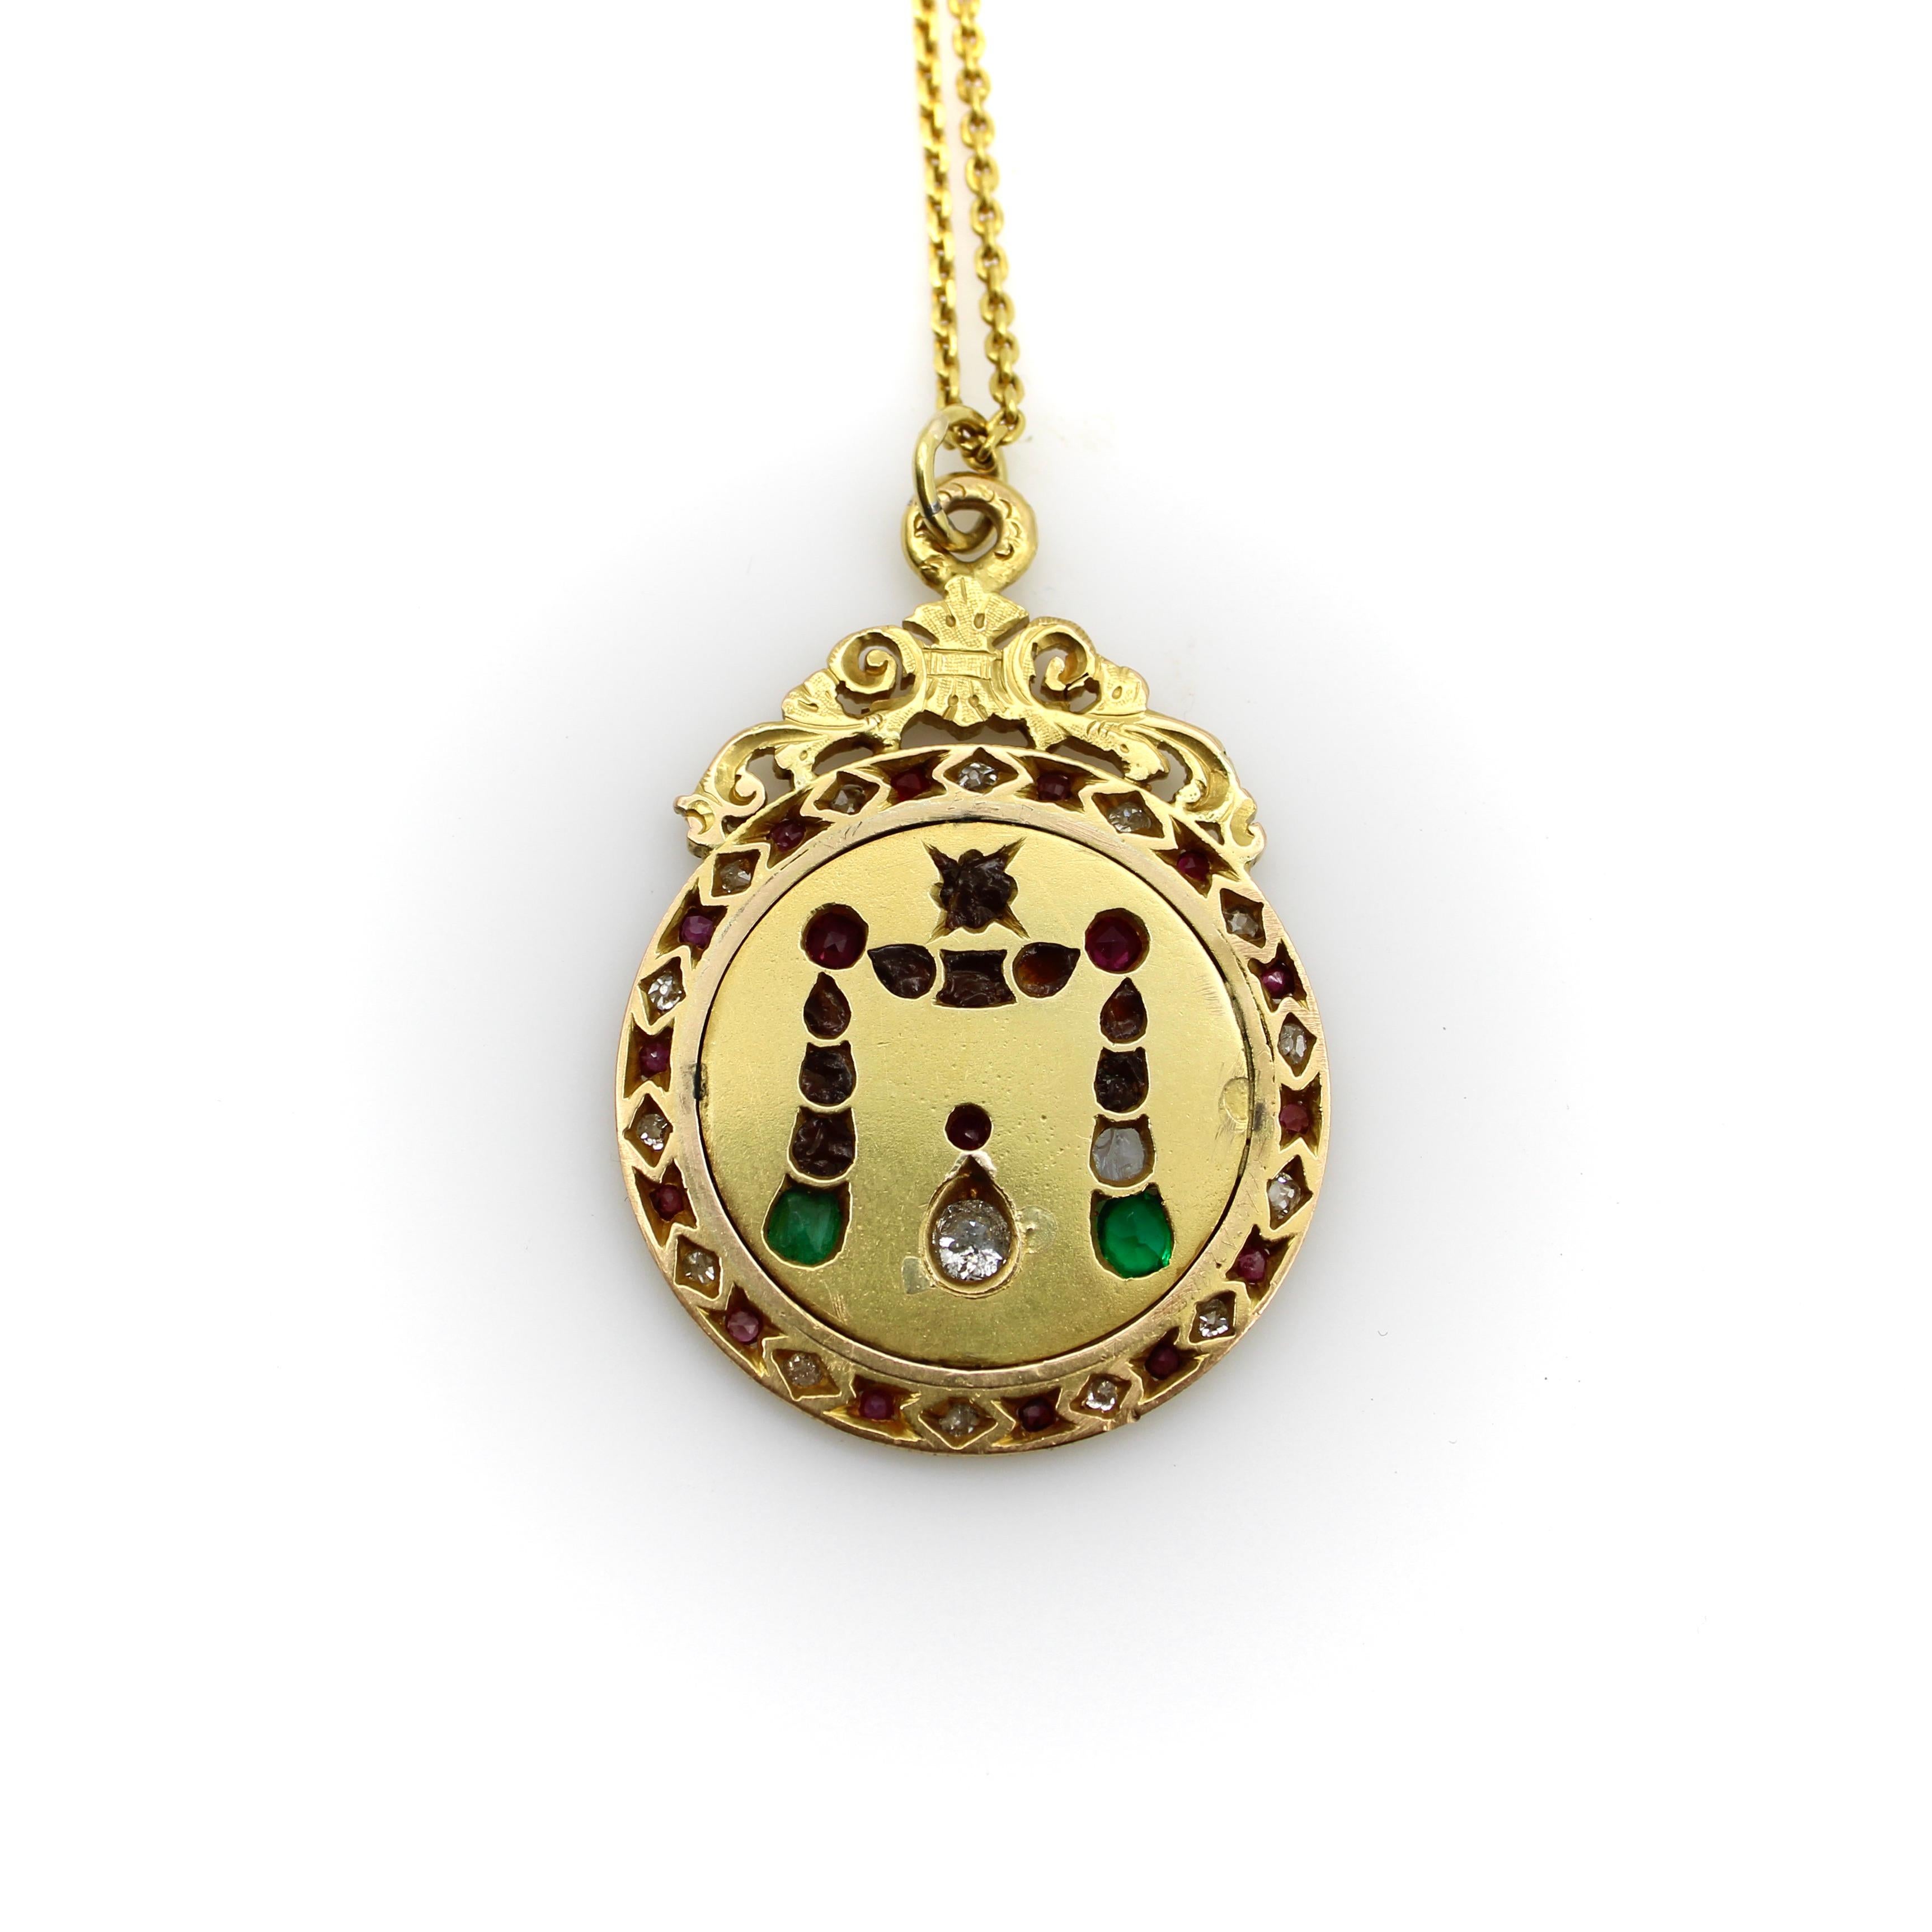 Circa 1840, this 22k gold medallion pendant is a treasure. Encrusted with colorful antique gemstones, the pendant contains a stunning array of hand cut diamonds, emeralds, and rubies. The pendant takes its shape from a coin, with a ribbed outside